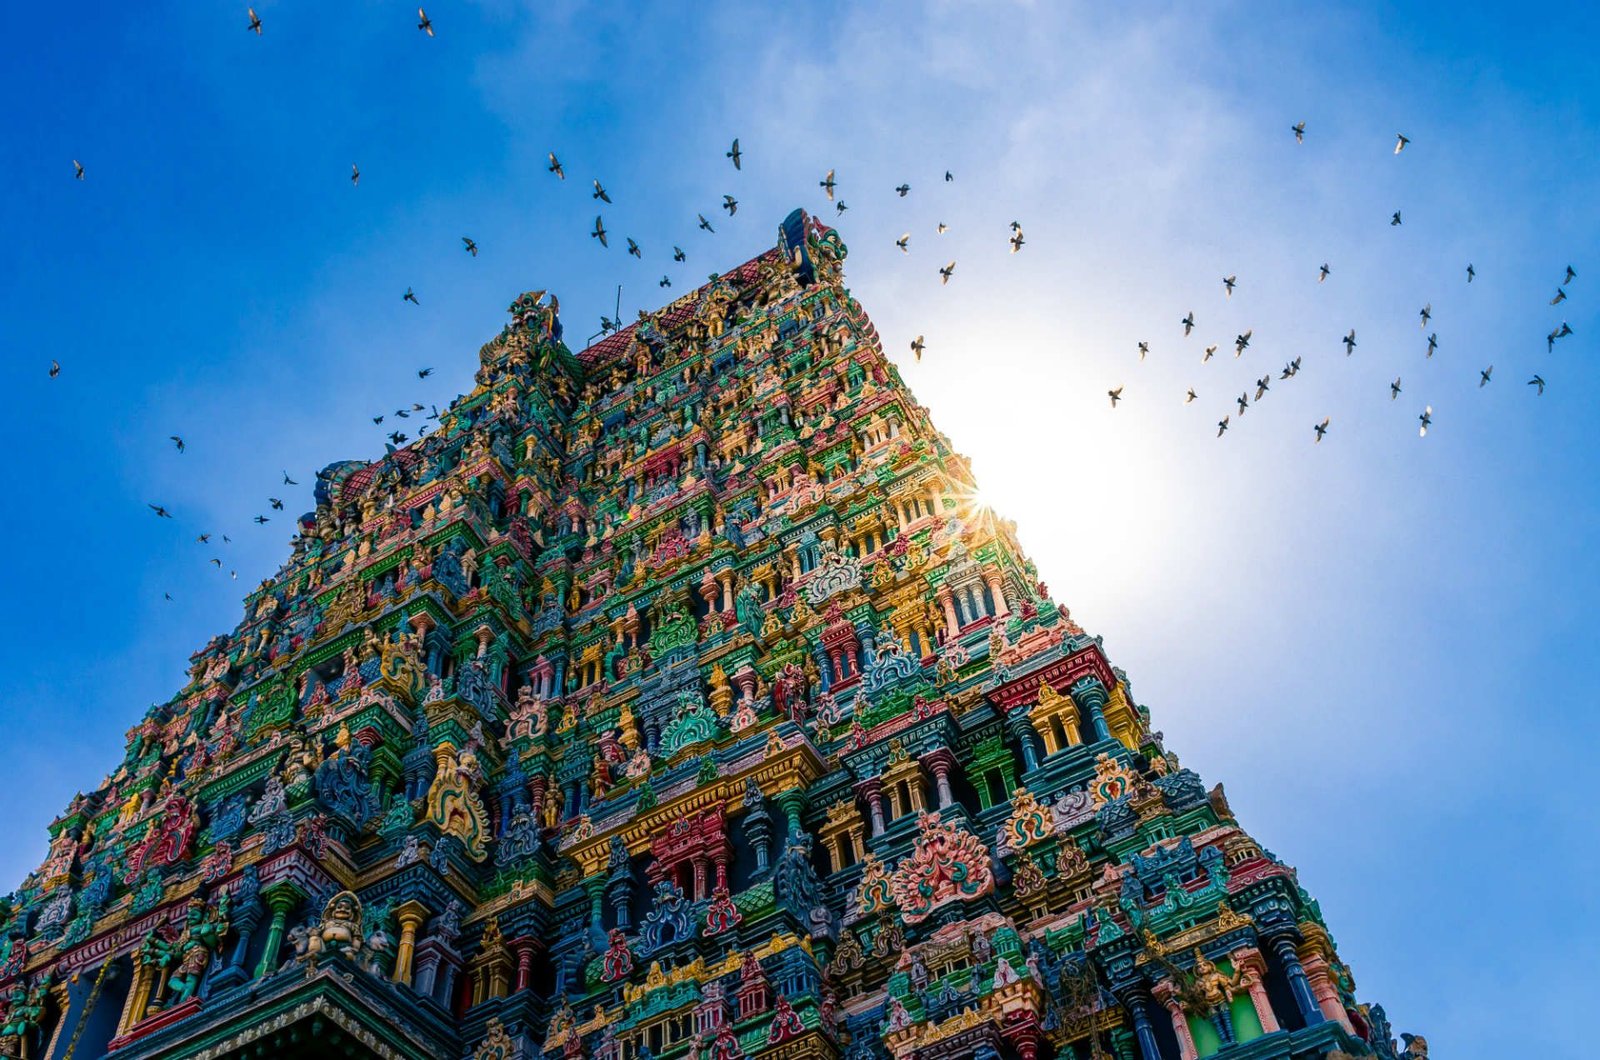 Tamil Nadu, located in the southern part of India, is a state that is steeped in history and culture. It is famous for its ancient temples,